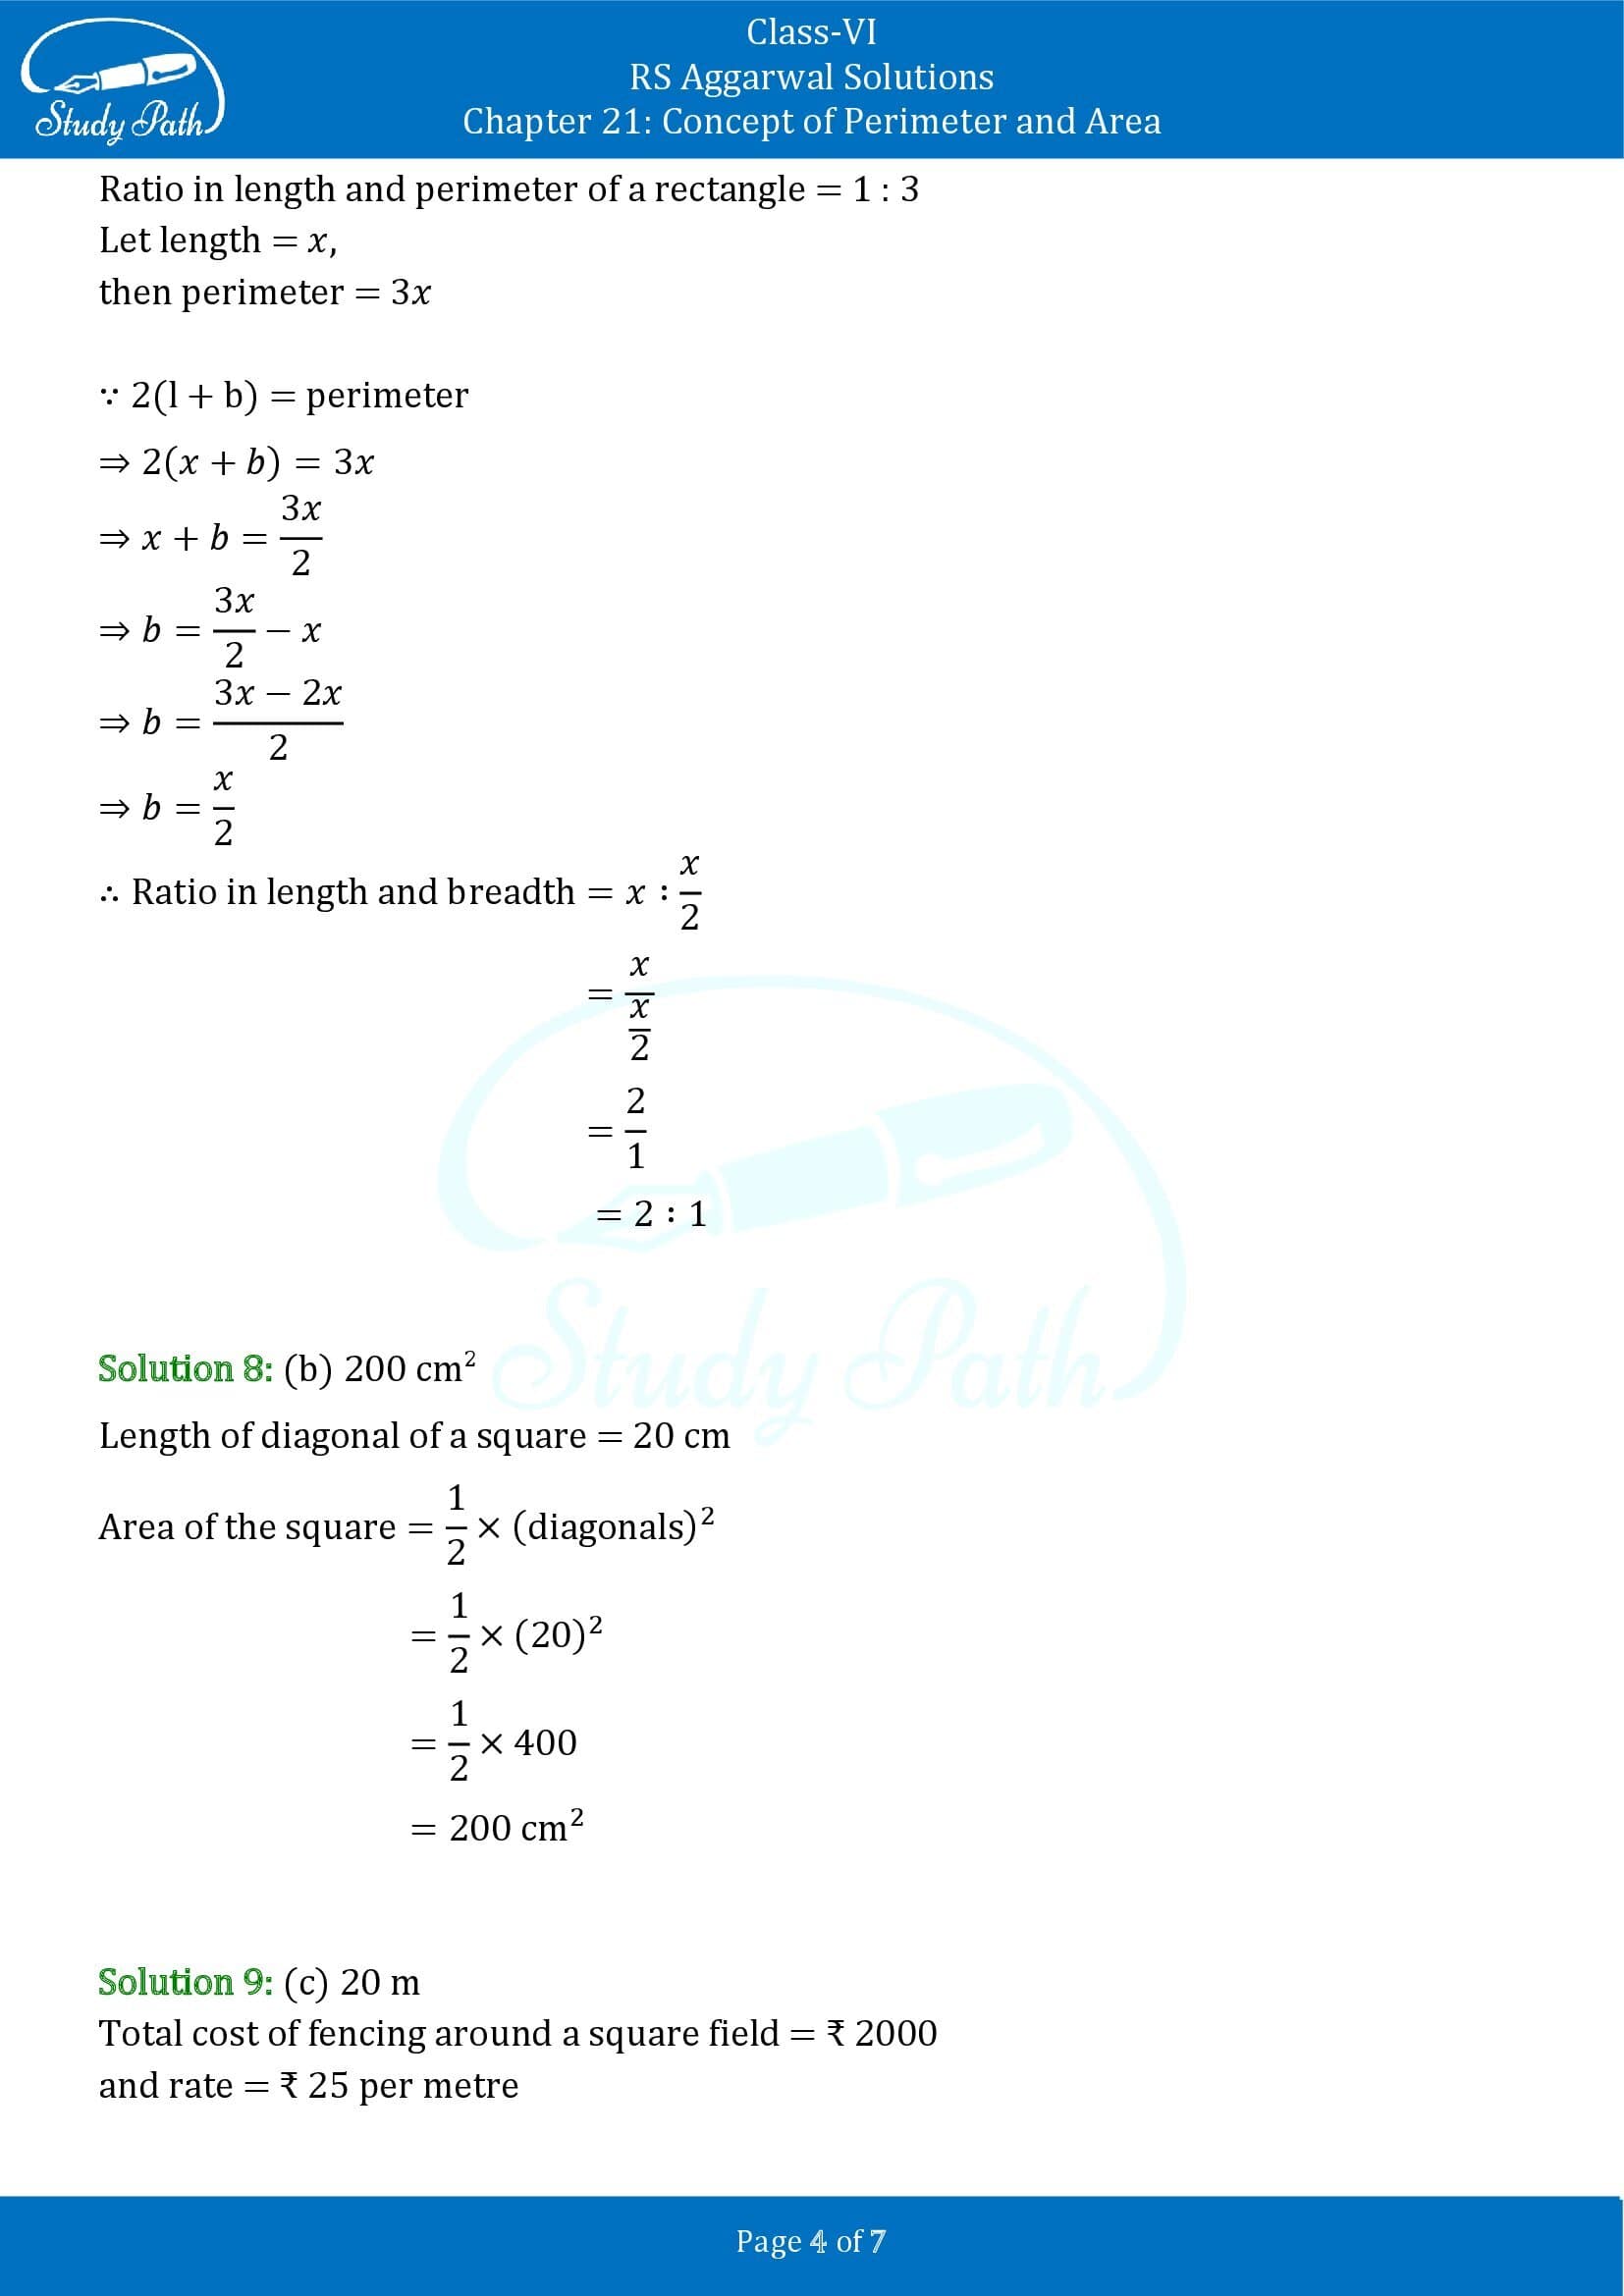 RS Aggarwal Solutions Class 6 Chapter 21 Concept of Perimeter and Area Exercise 21E MCQ 004